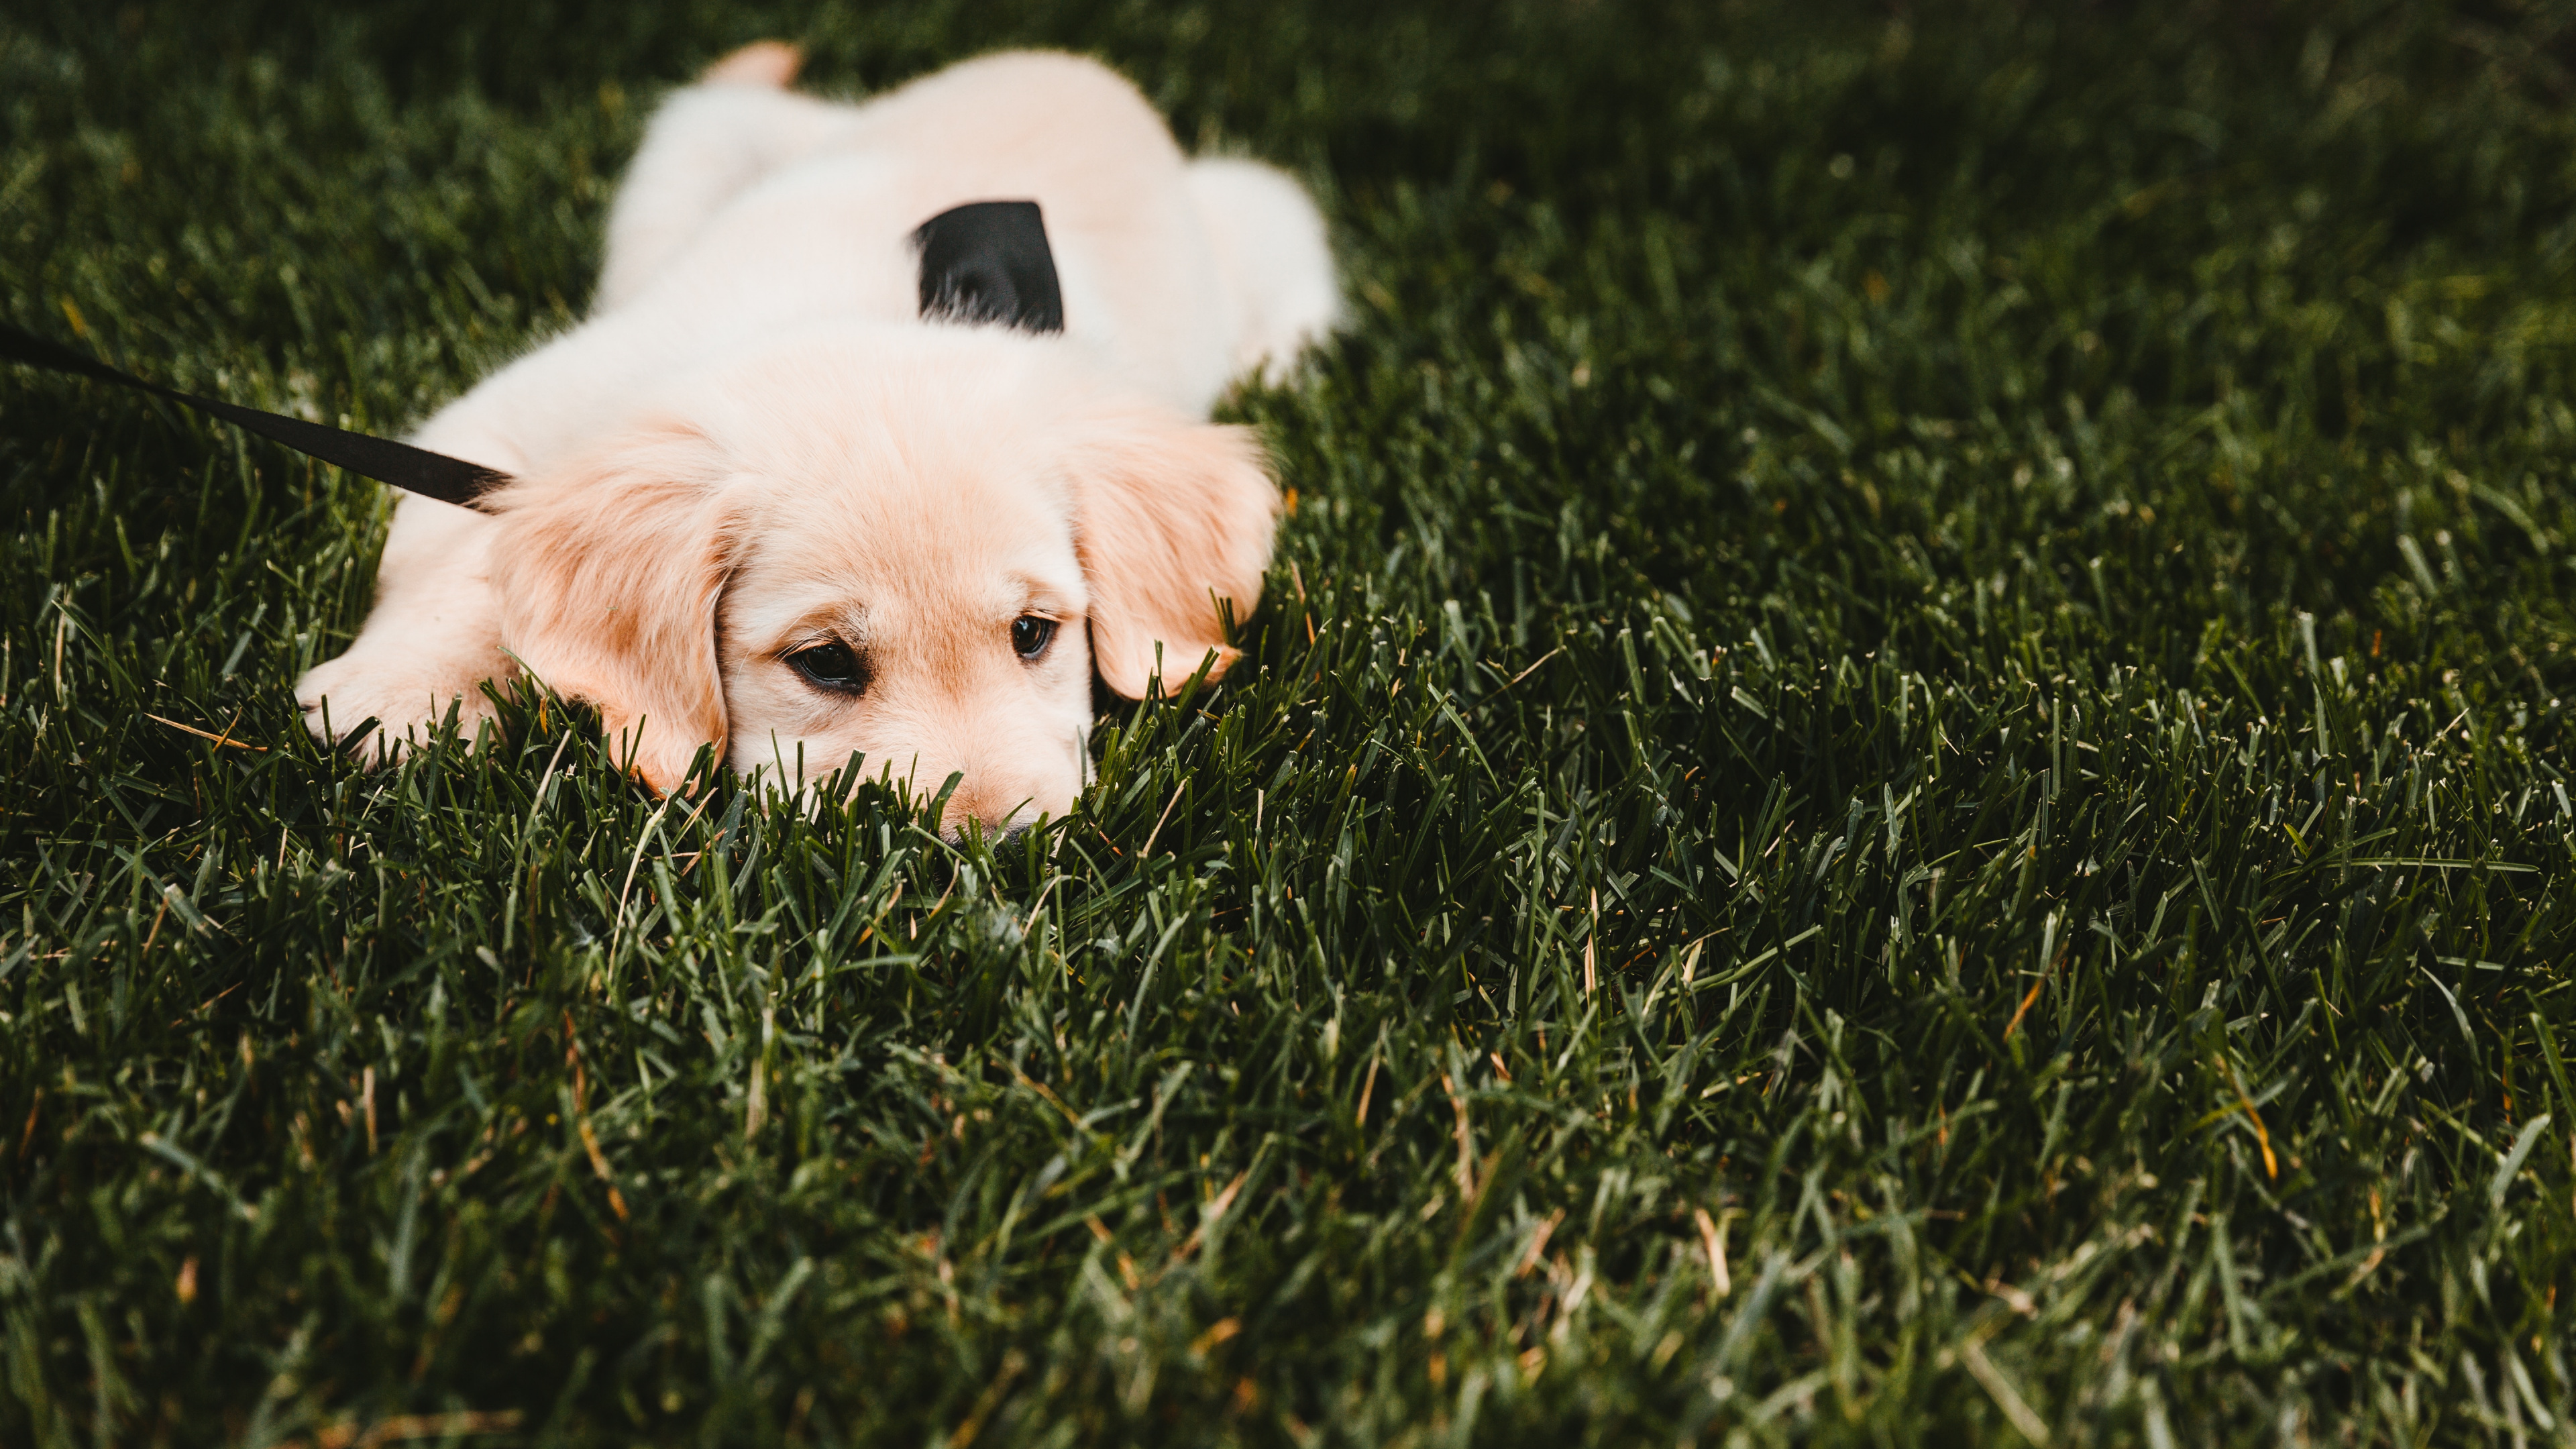 White Short Coated Dog Lying on Green Grass Field During Daytime. Wallpaper in 3840x2160 Resolution